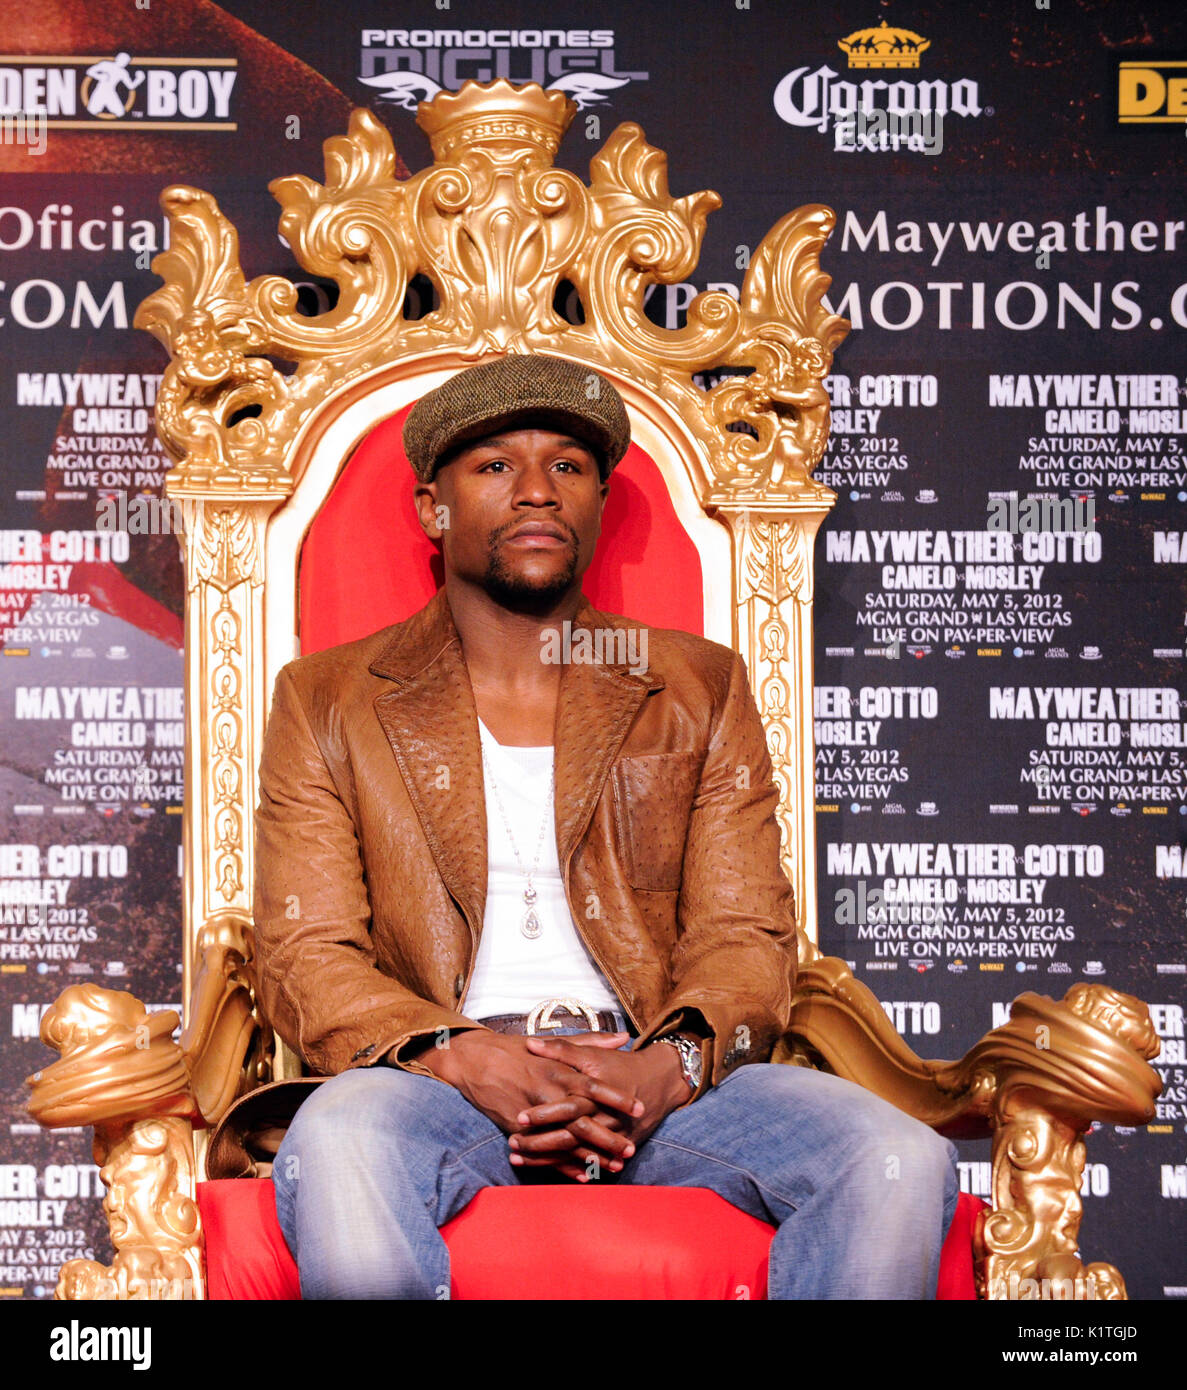 Boxer Floyd Mayweather attends press conference Grauman's Chinese Theatre Hollywood March 1,2012. Mayweather Cotto will meet WBA Super Welterweight World Championship fight May 5 MGM Grand Las Vegas. Stock Photo